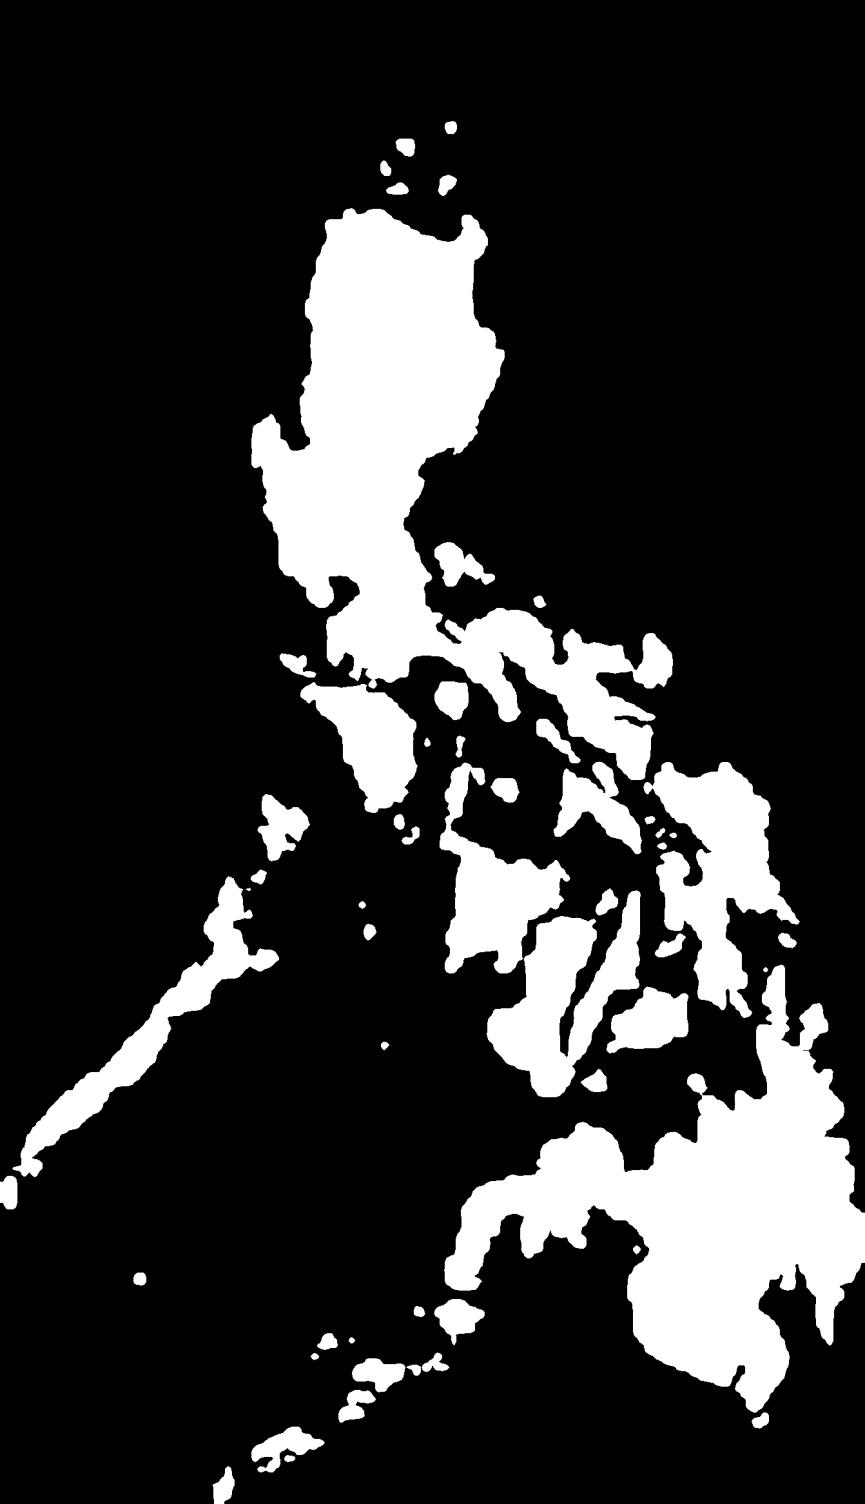 3.2 Simulation 2: Grid Storage in the Philippines Visayas Grid 3.2.1 Introduction The Visayas region of the Philippines is an archipelago of islands to the south of Luzon.